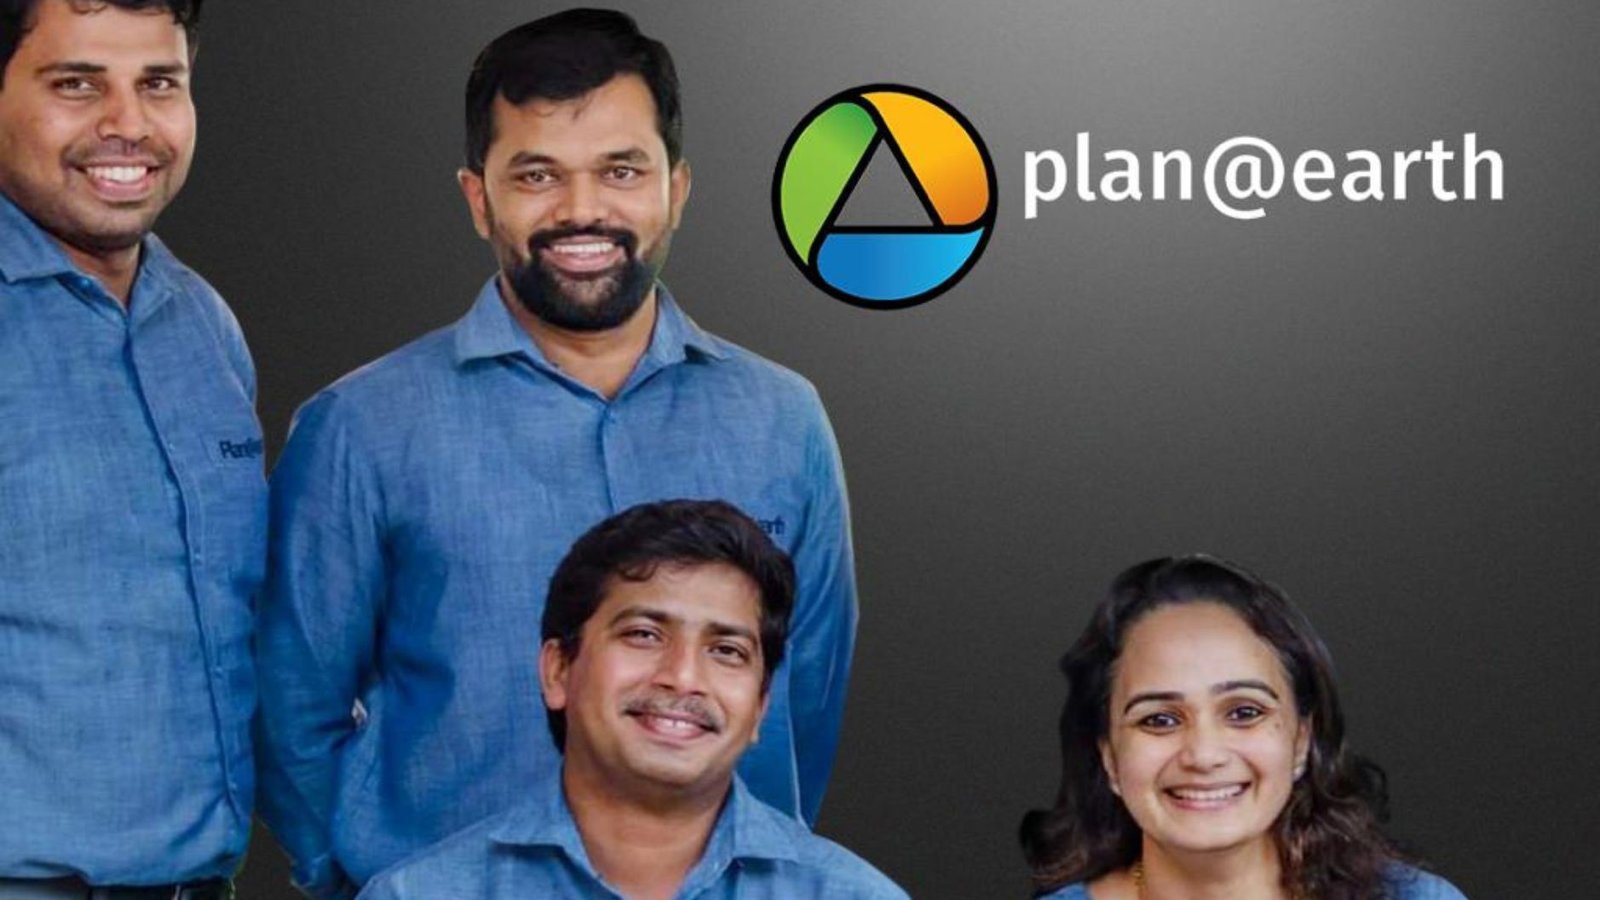 The four-member team of plan@earth